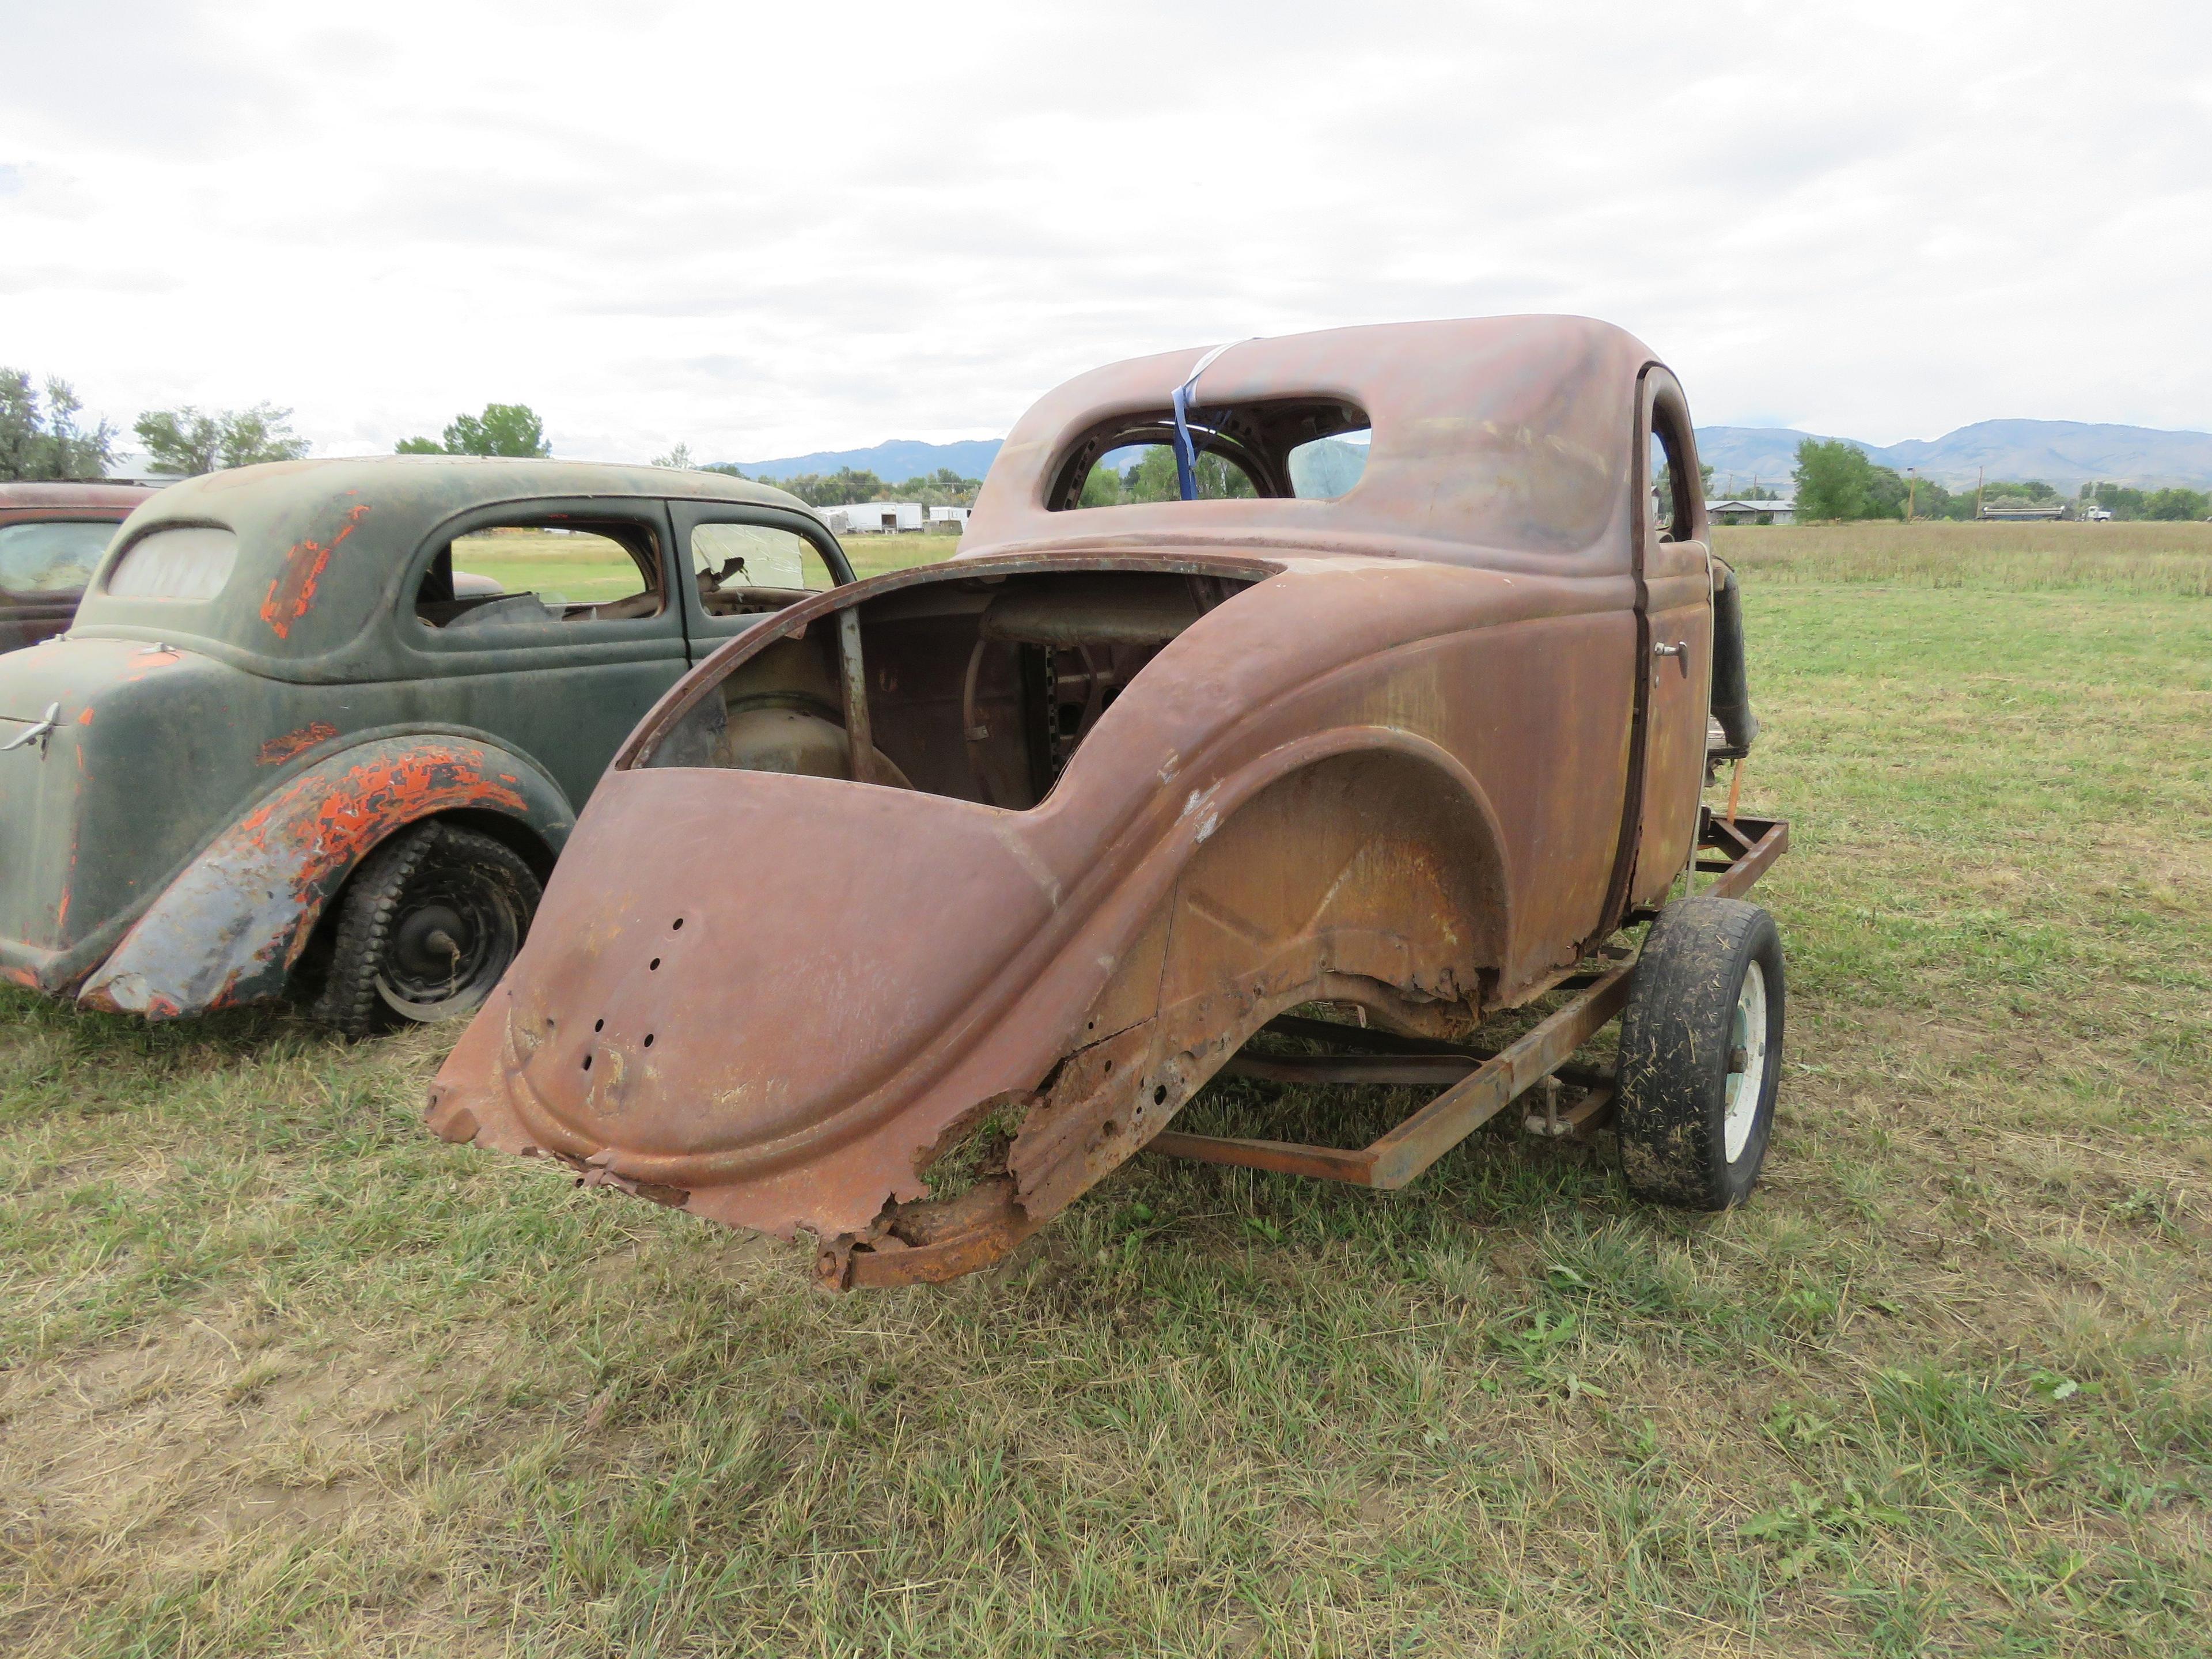 1935 Ford 3 Window Coupe Body for Rod or Restore